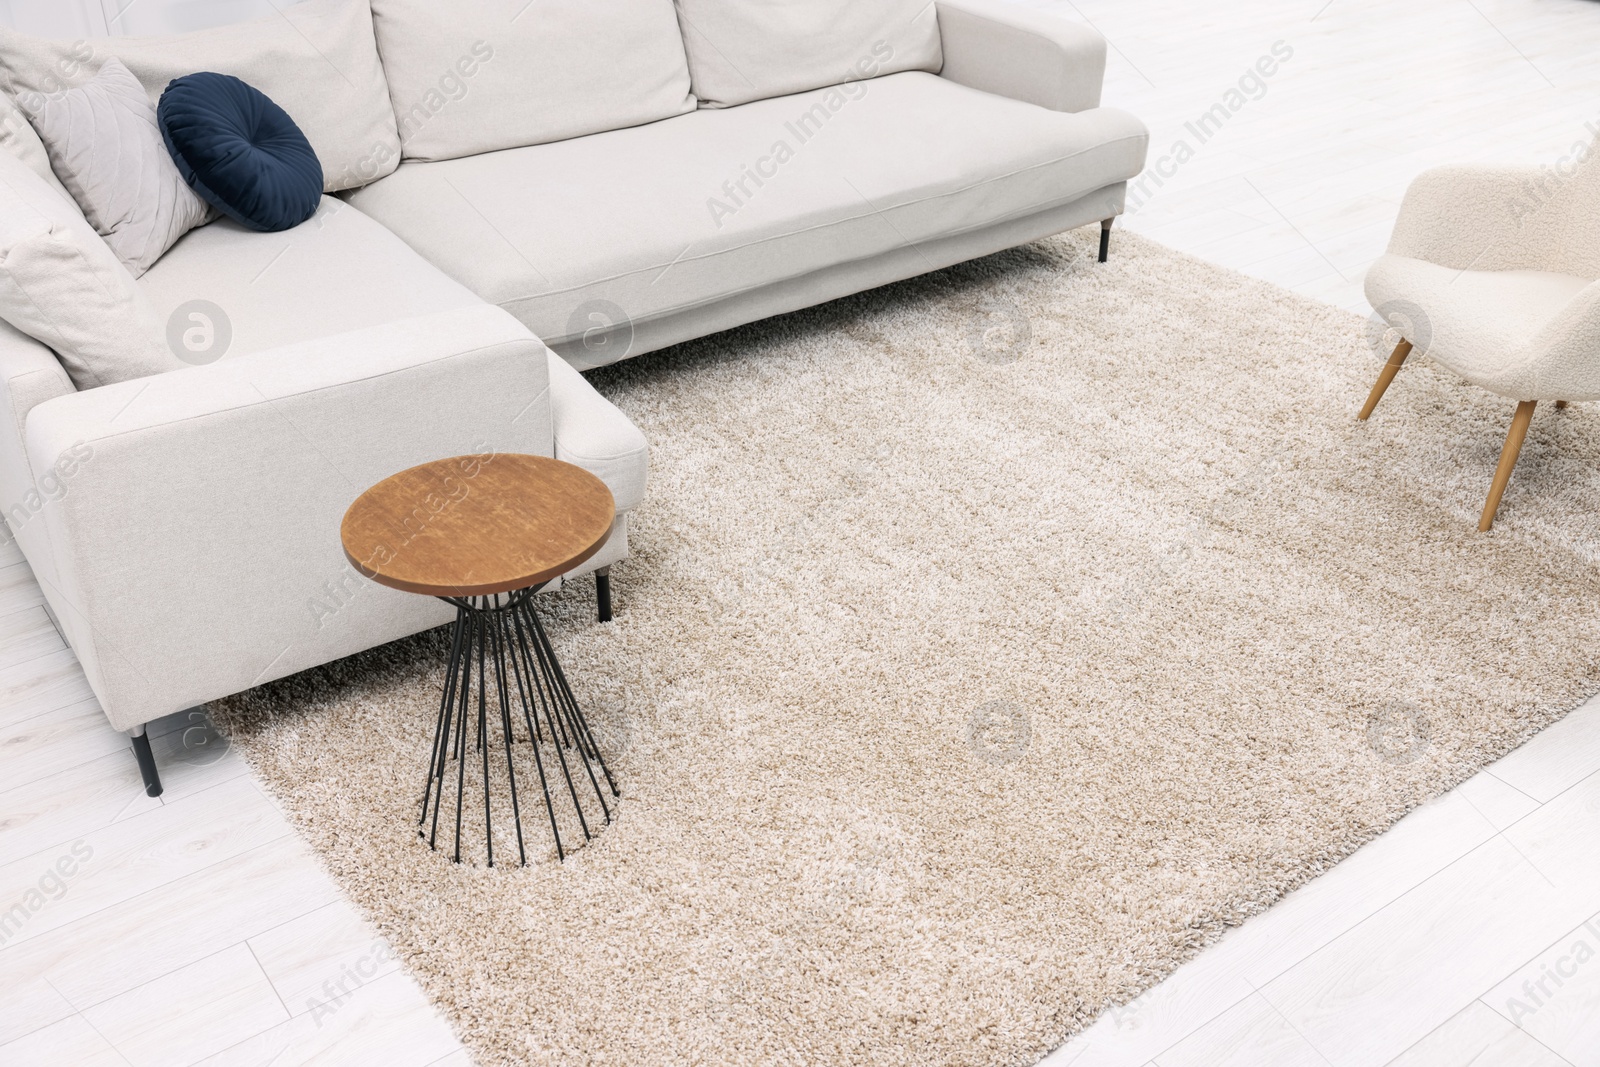 Photo of Fluffy carpet and stylish furniture on floor indoors